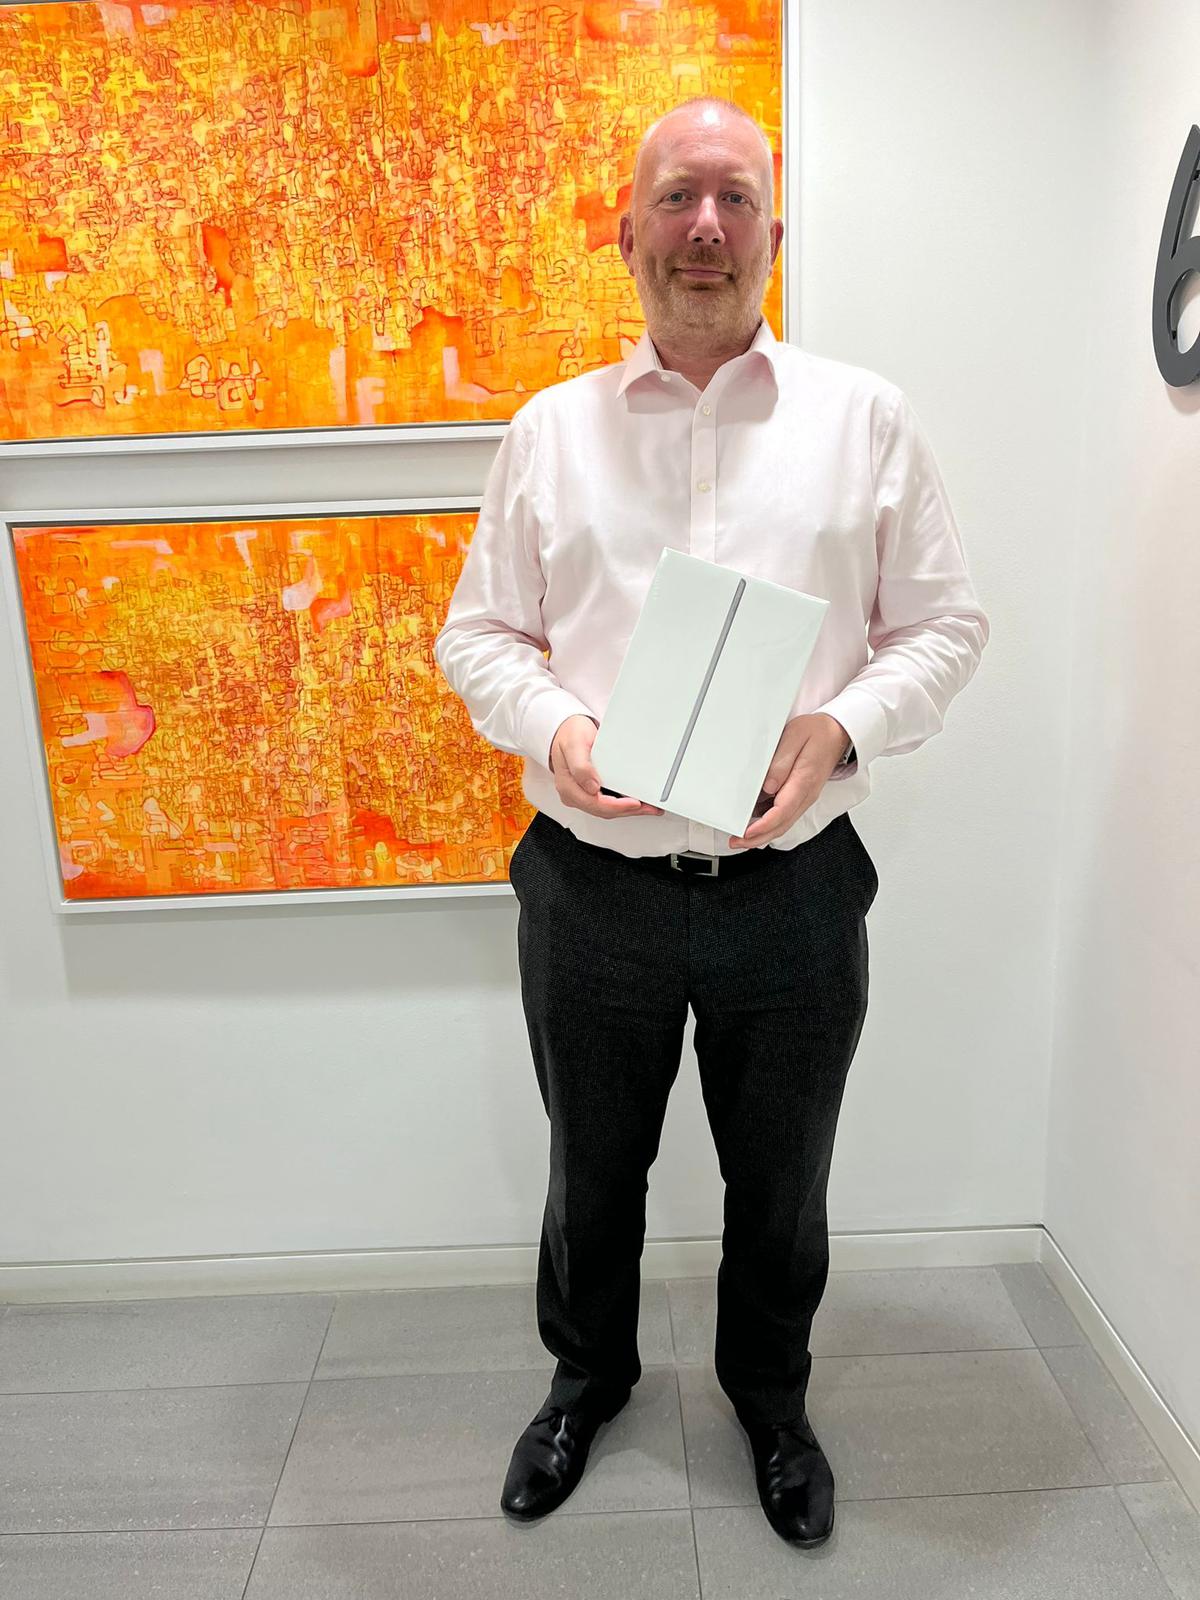 iPad Winner of Harness the business-boosting power of the latest digital innovations in insurance